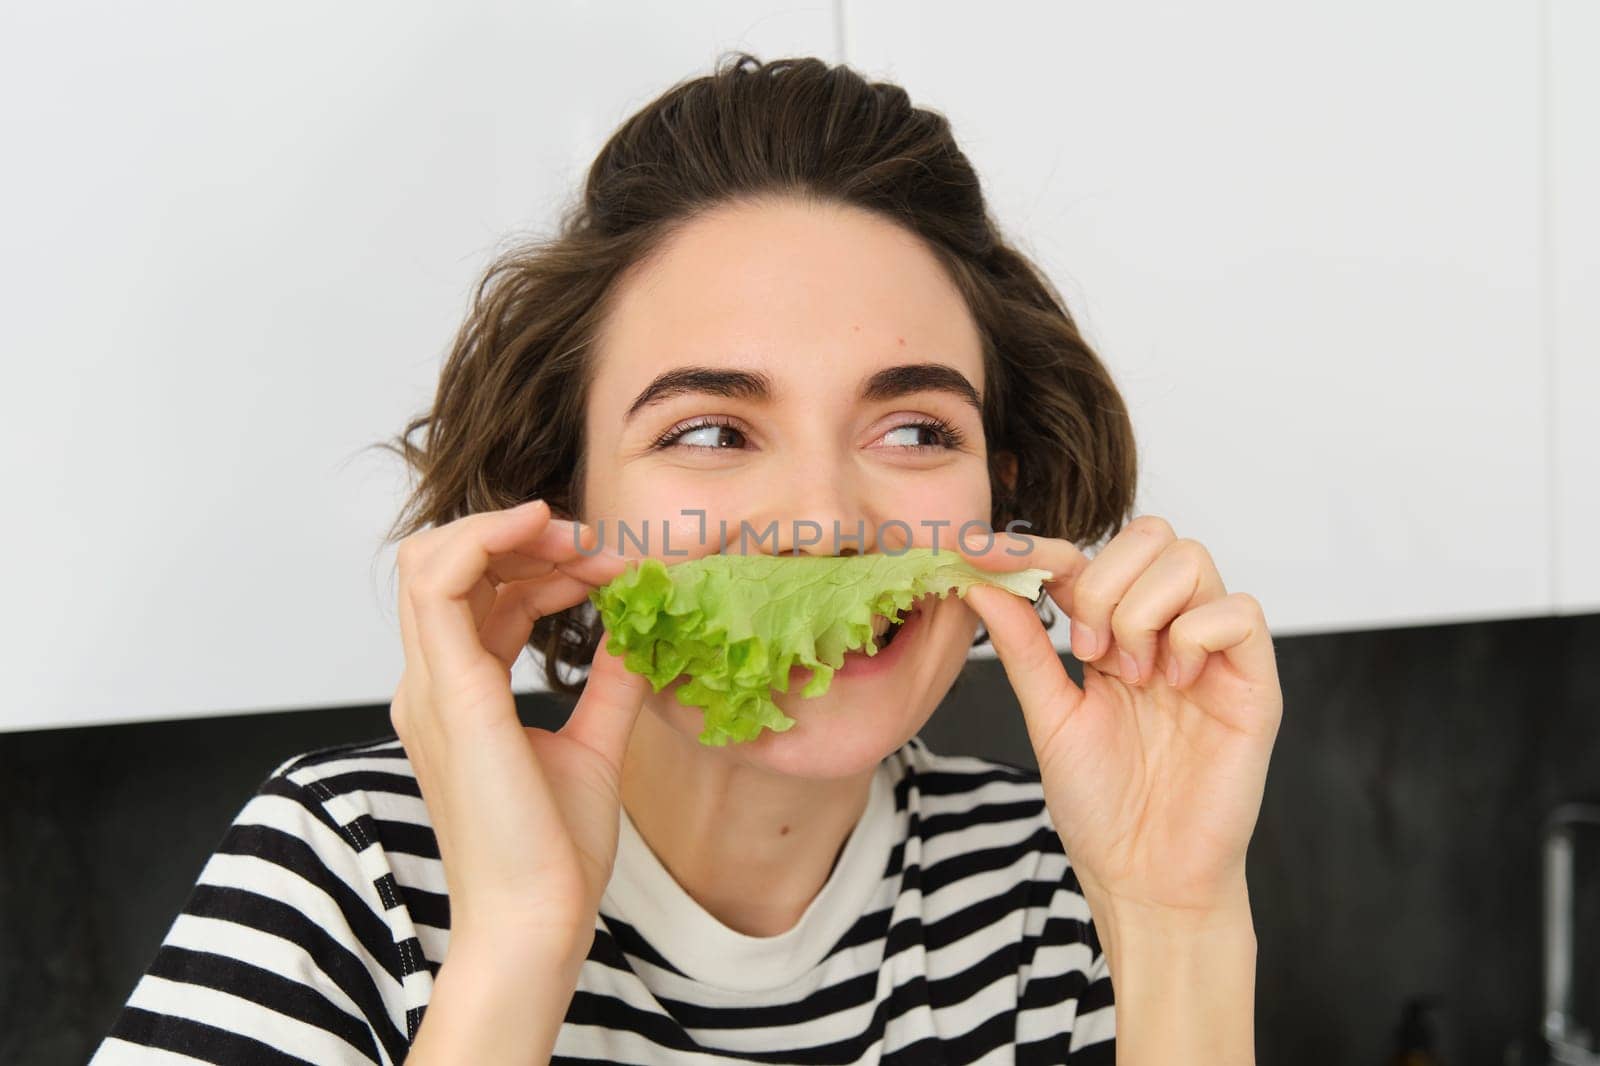 Cute smiling woman eating lettuce leaf and smiling, having a healthy snack, likes vegetables, posing in the kitchen. Lifestyle and food concept